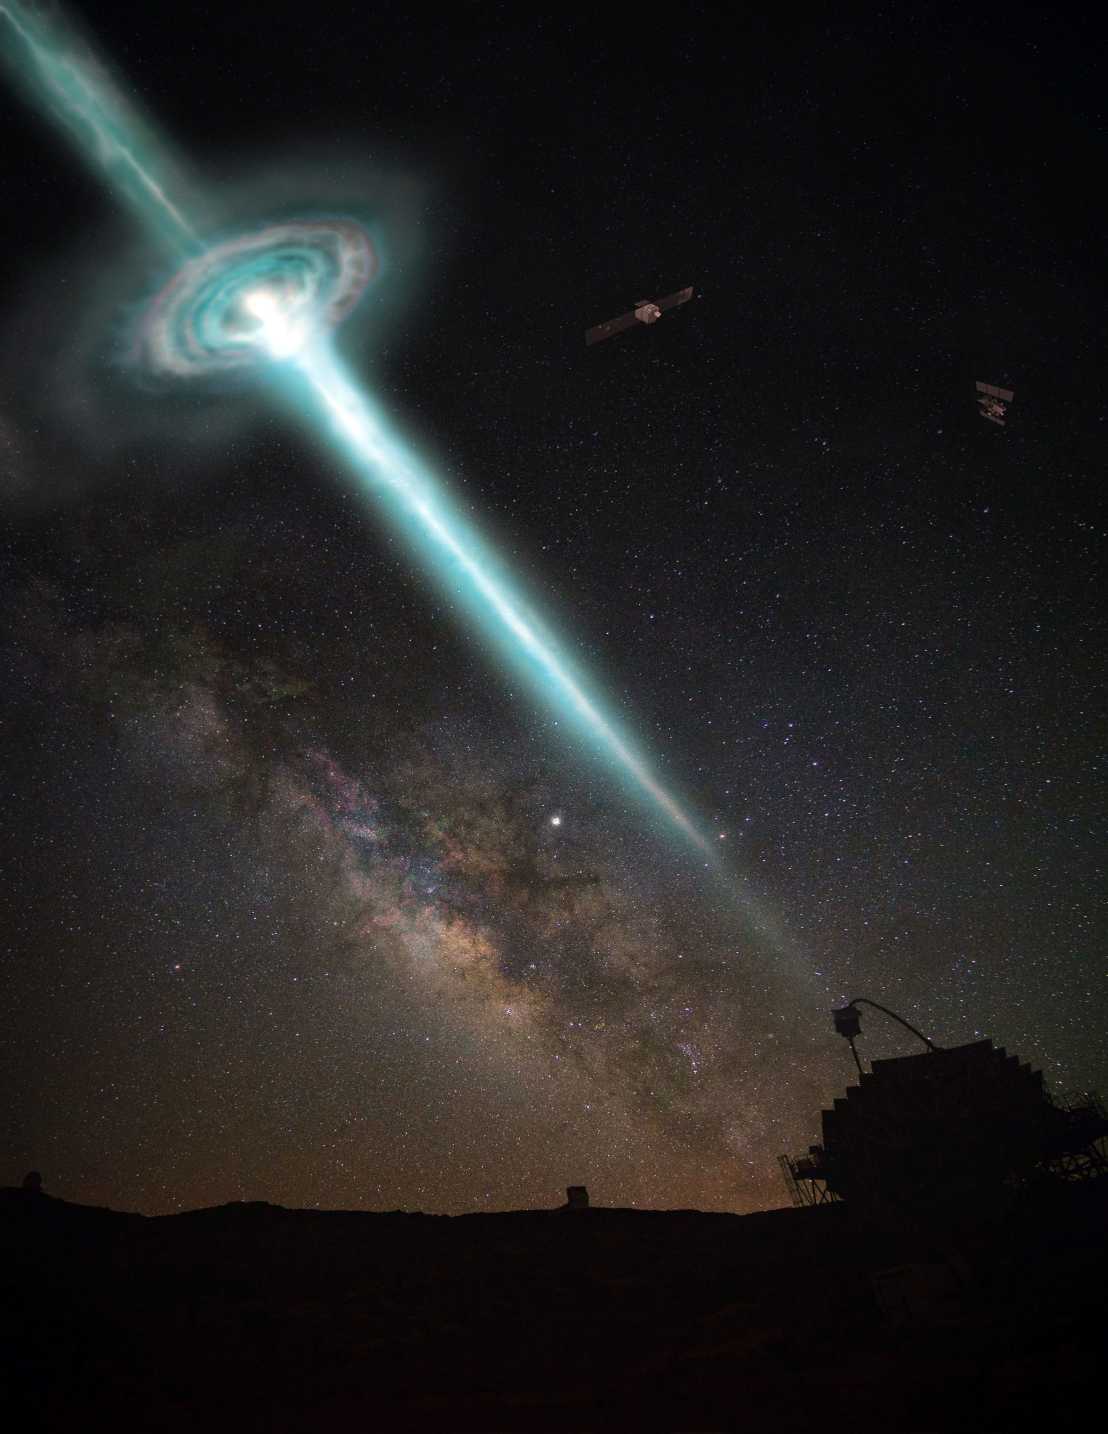 Artist's impression of a gamma ray burst observed by the MAGIC telescope system and satellite observatories